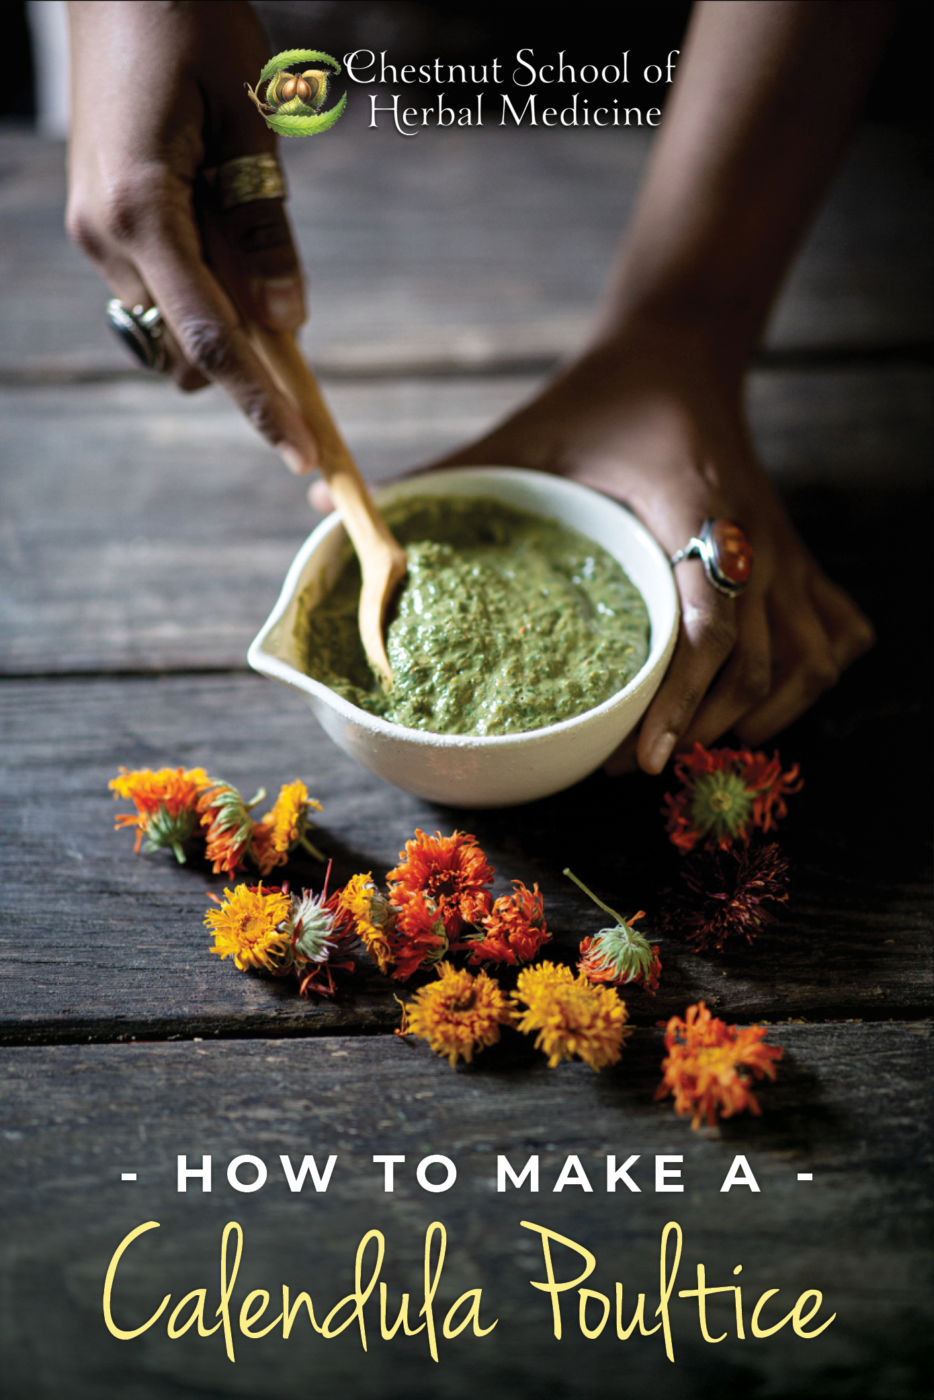 How to Make a Soothing Calendula Poultice